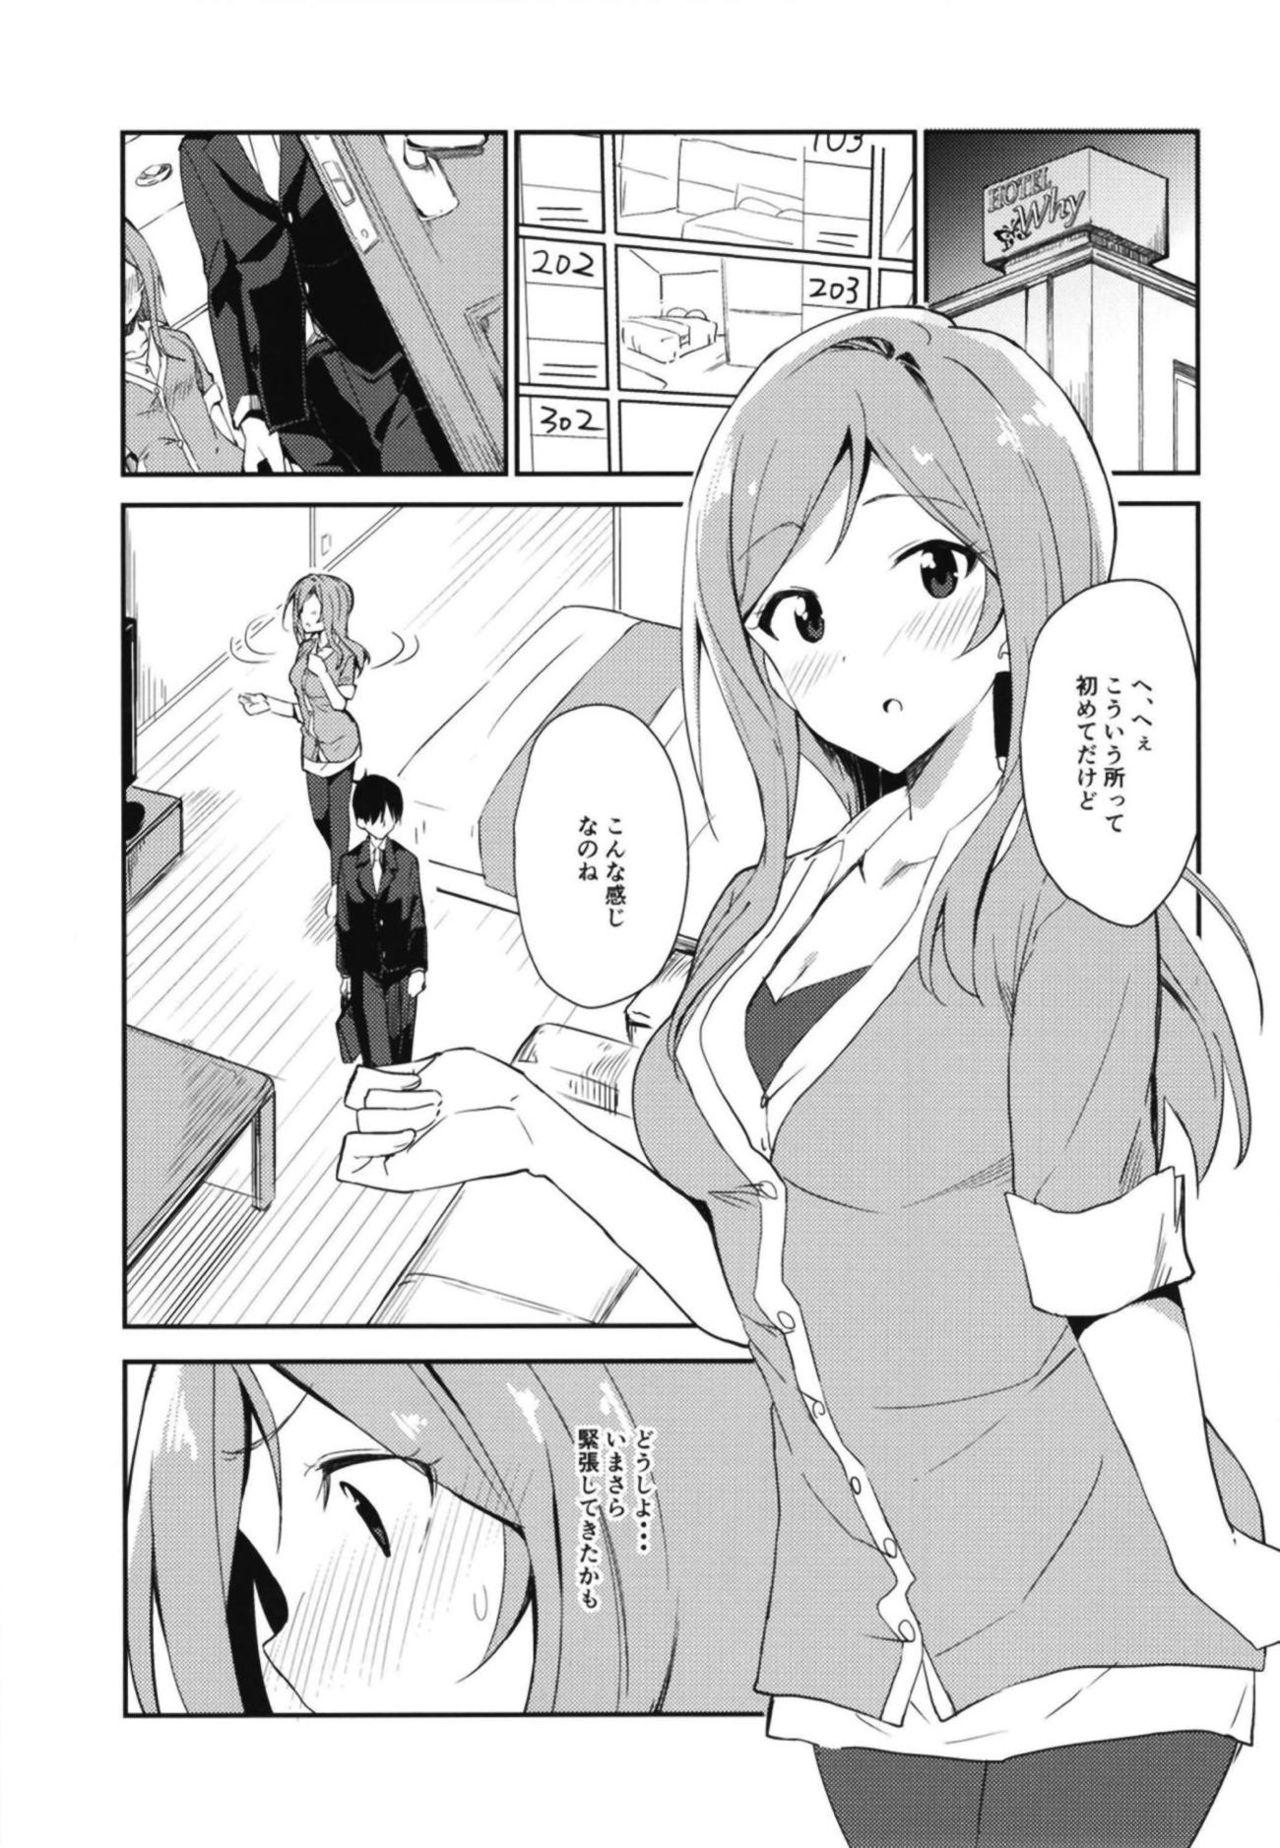 Tittyfuck Rio theater! - The idolmaster Amateurs Gone - Page 4